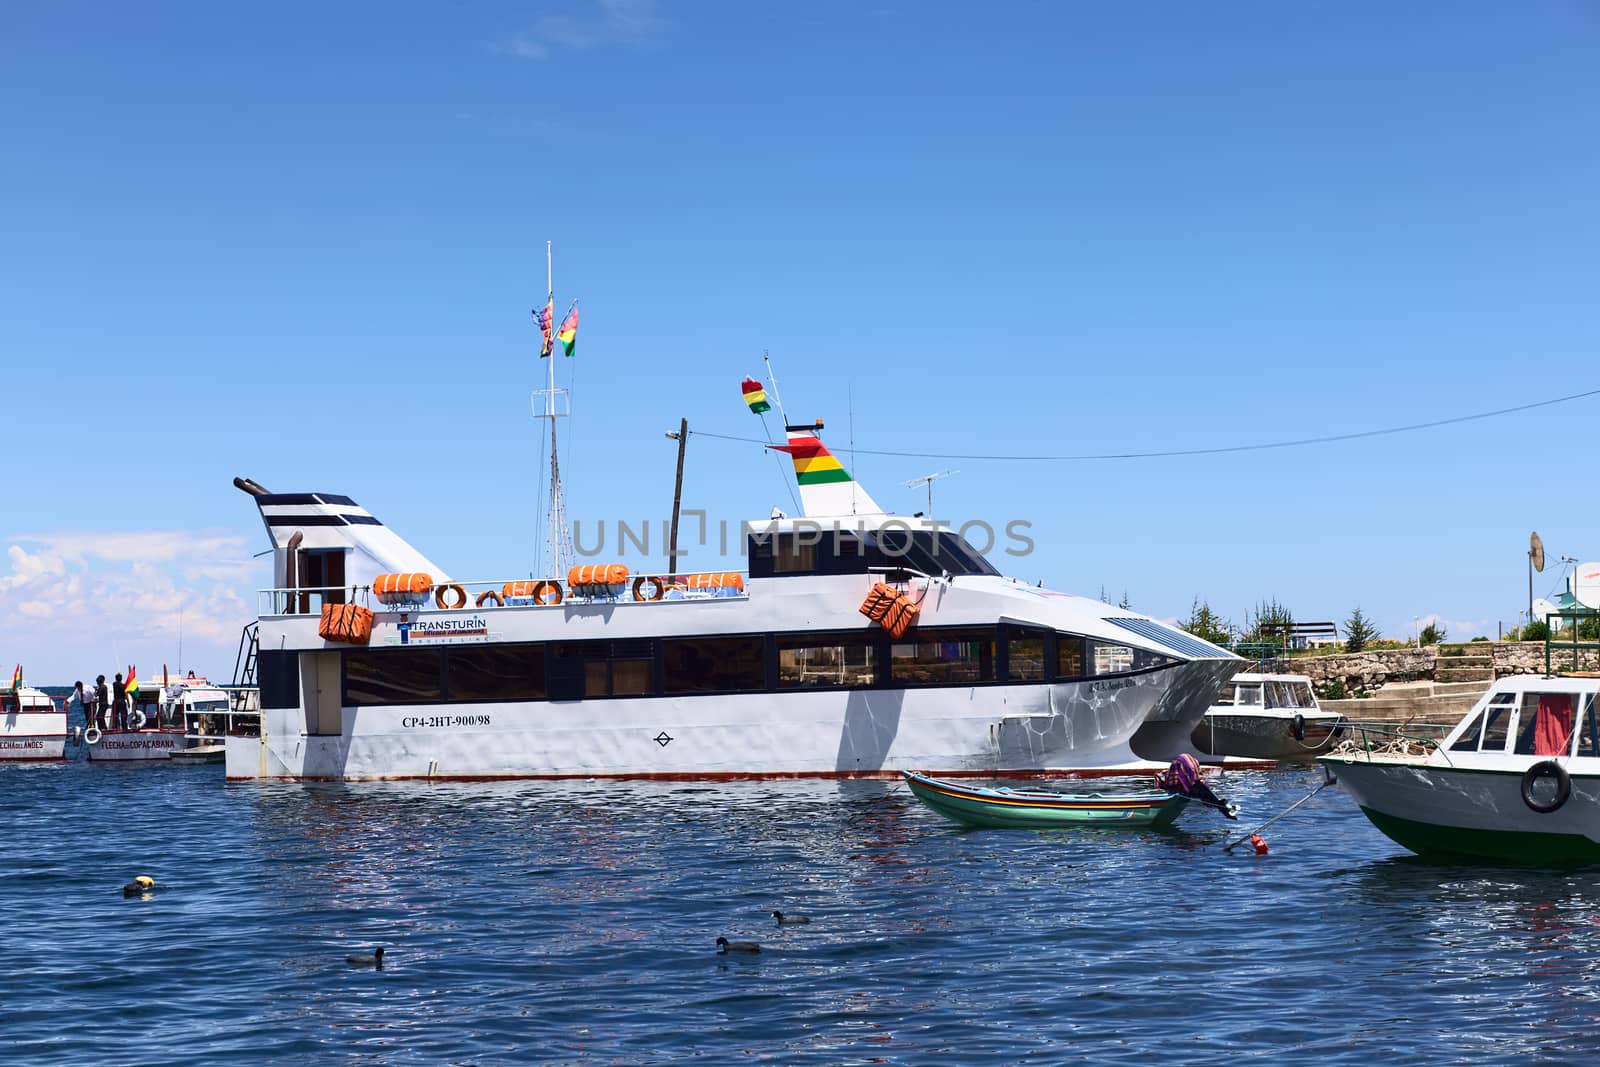 COPACABANA, BOLIVIA - OCTOBER 28, 2014: Big passenger ferry in the harbor of the small tourist town on the shore of Lake Titicaca on October 28, 2014 in Copacabana, Bolivia 